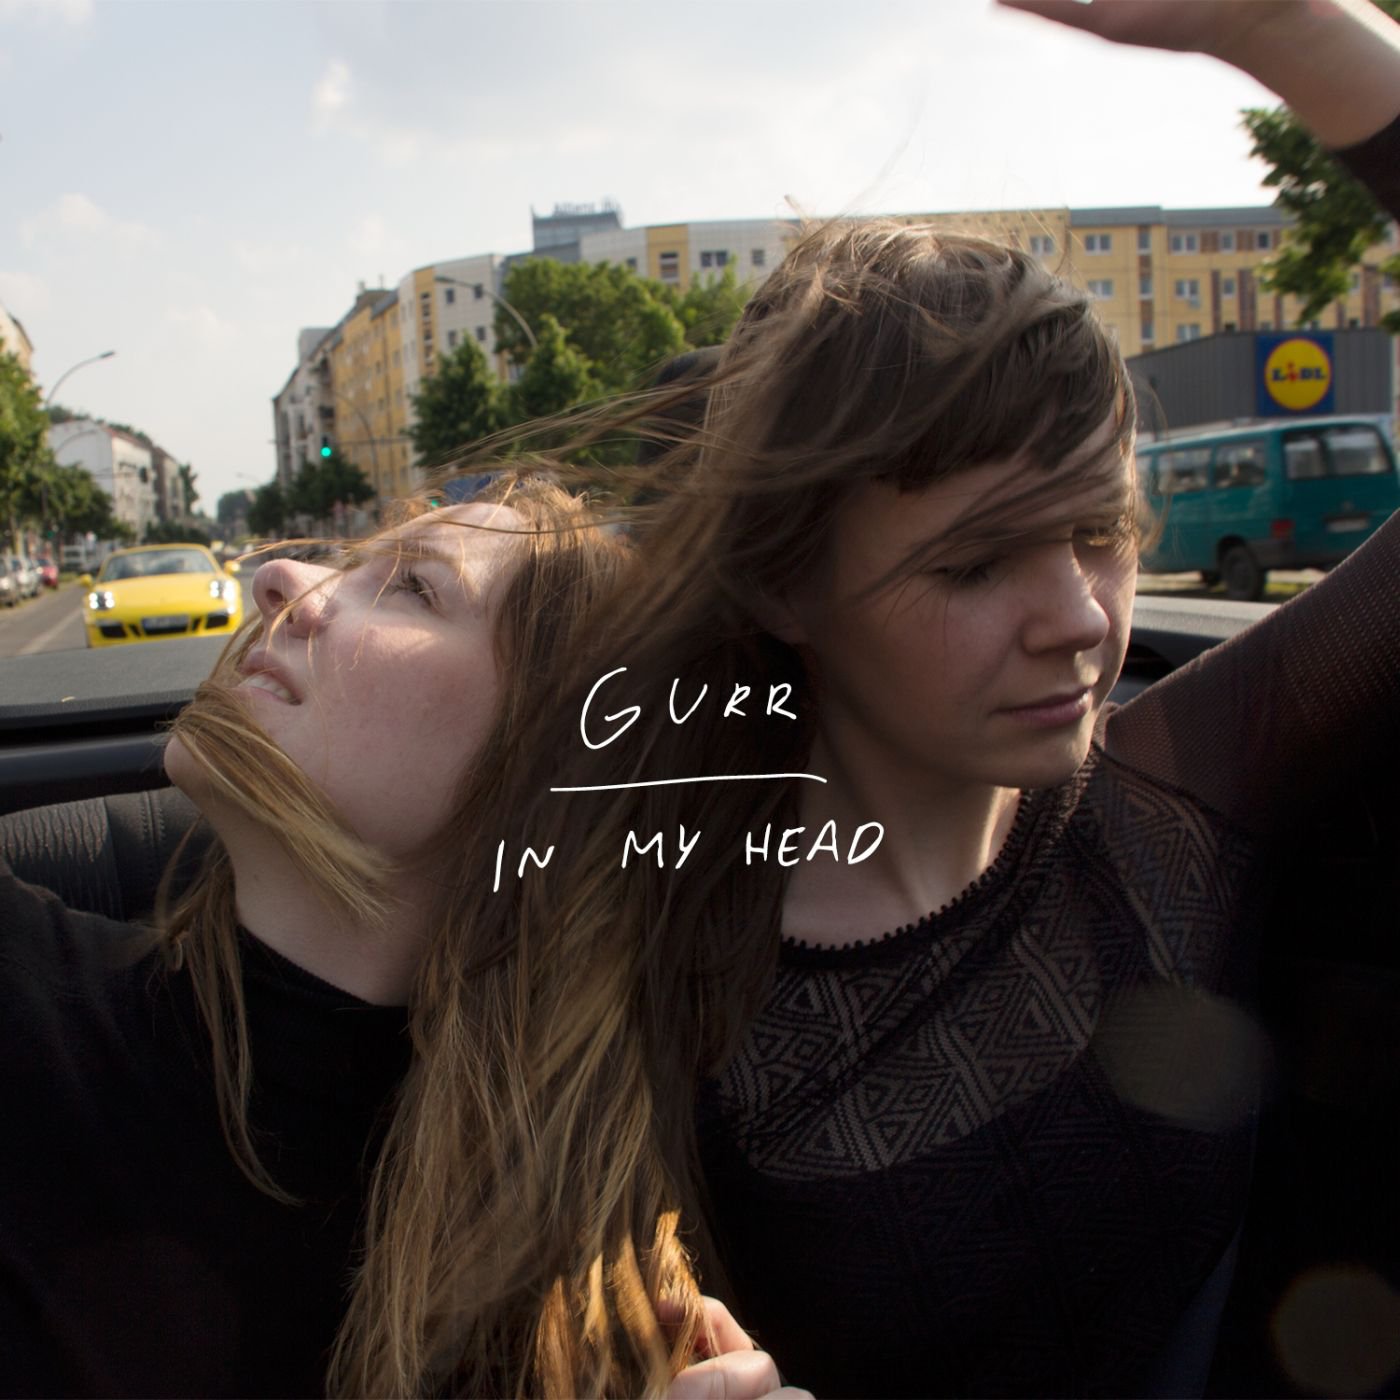 Gurr - In My Head (2016) FLAC Download